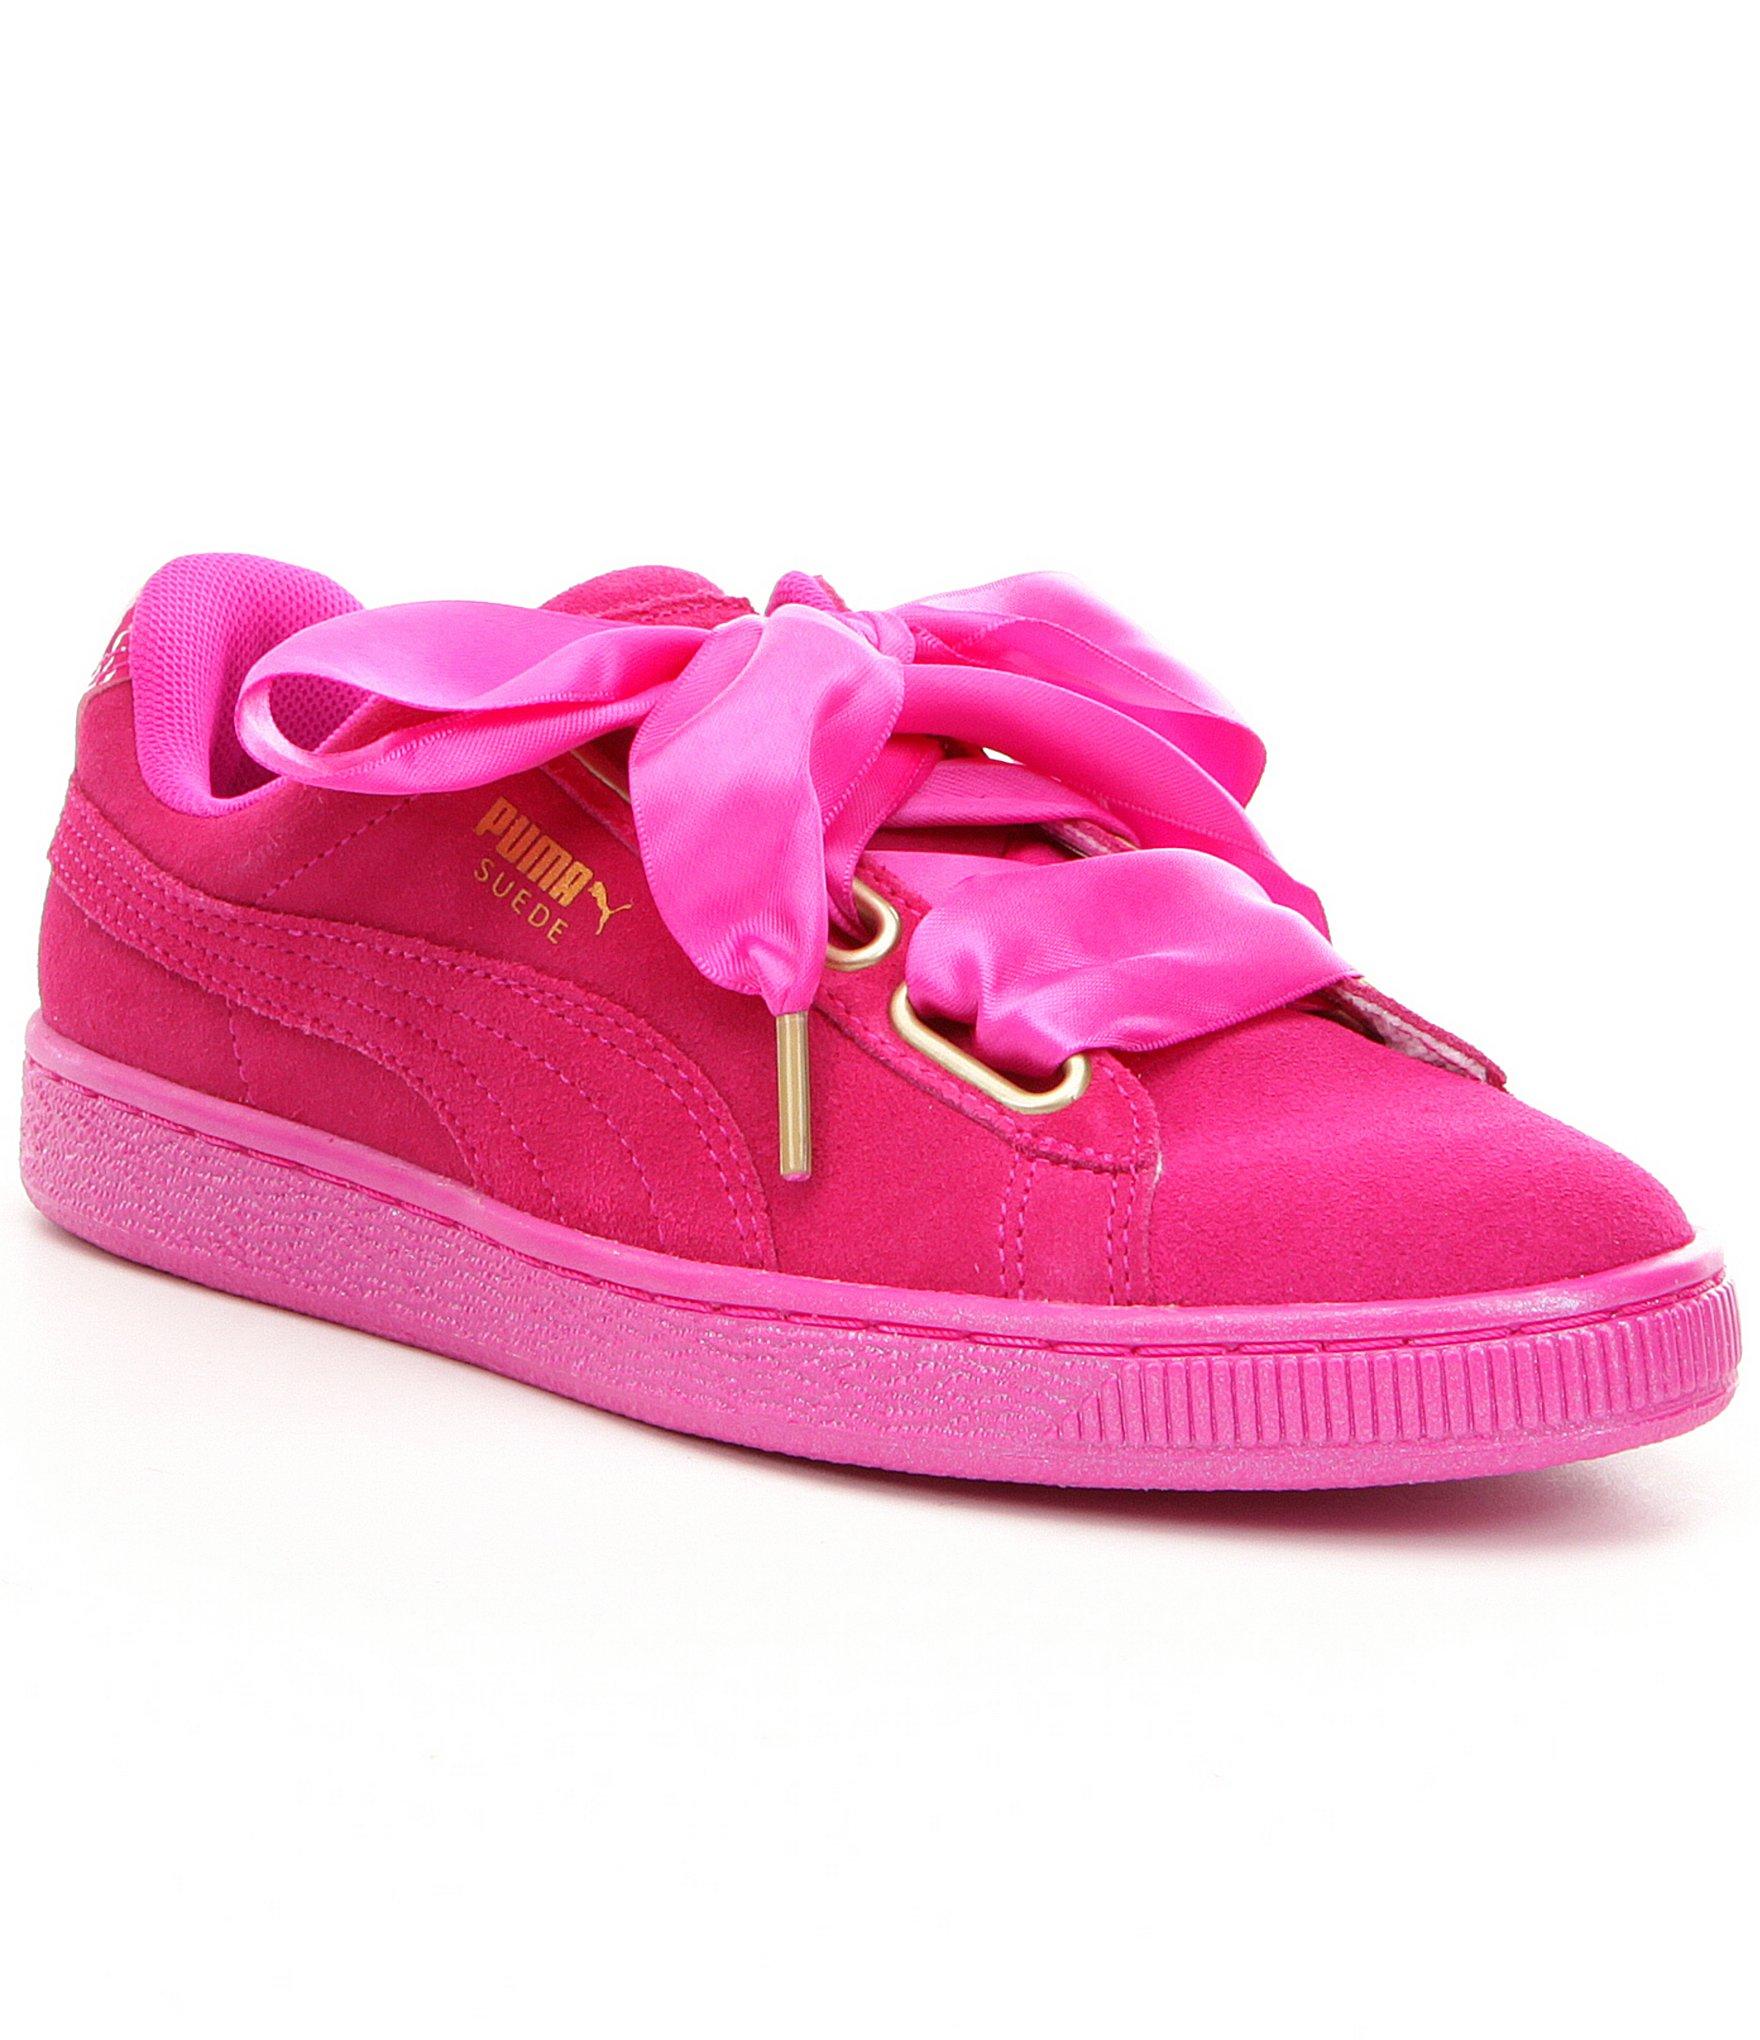 Puma Suede Heart Satin Sneakers in Pink | Lyst